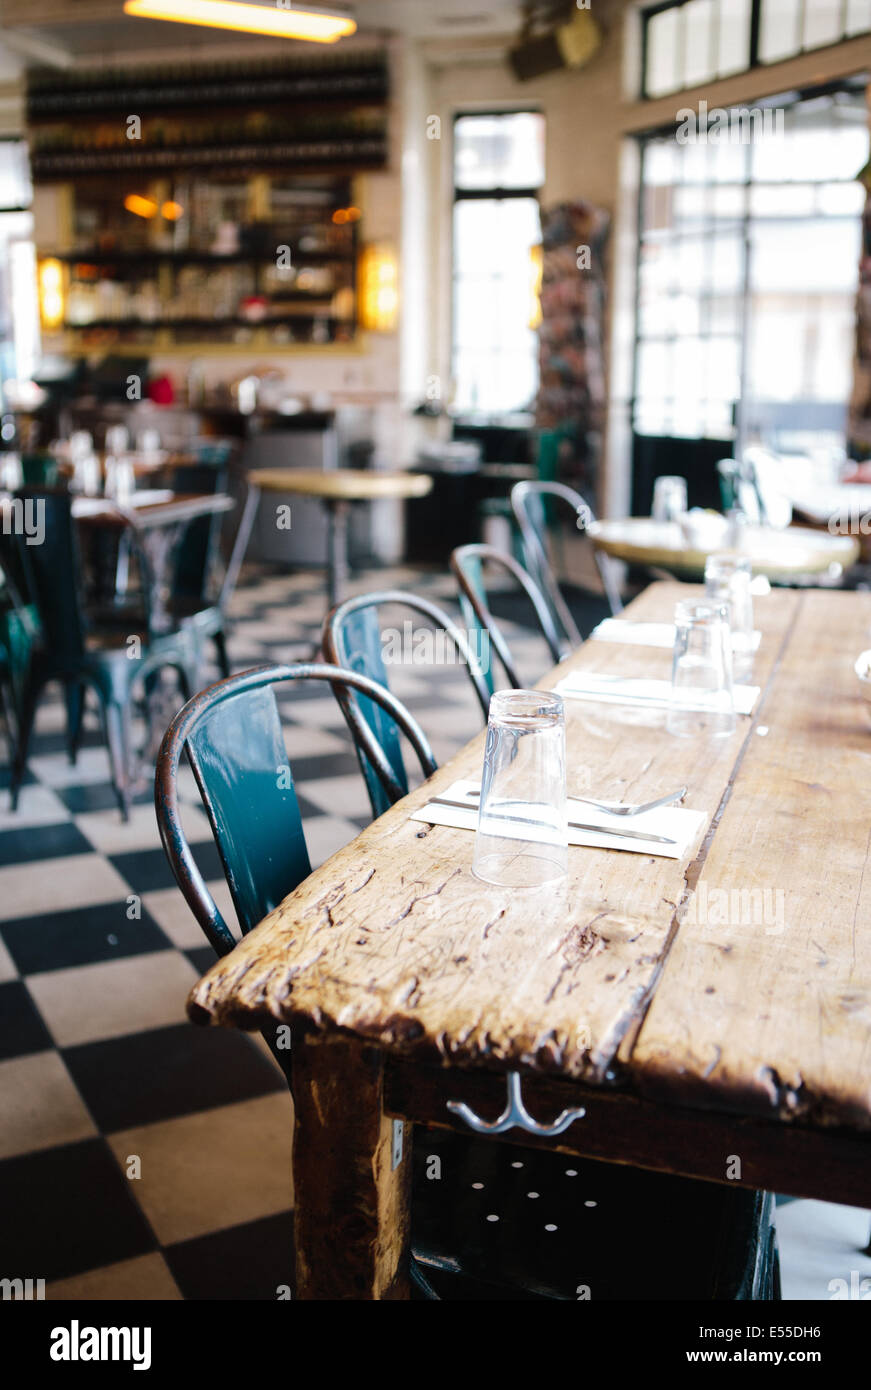 Community table with metal chairs and checkered floor in modern industrial restaurant. Stock Photo